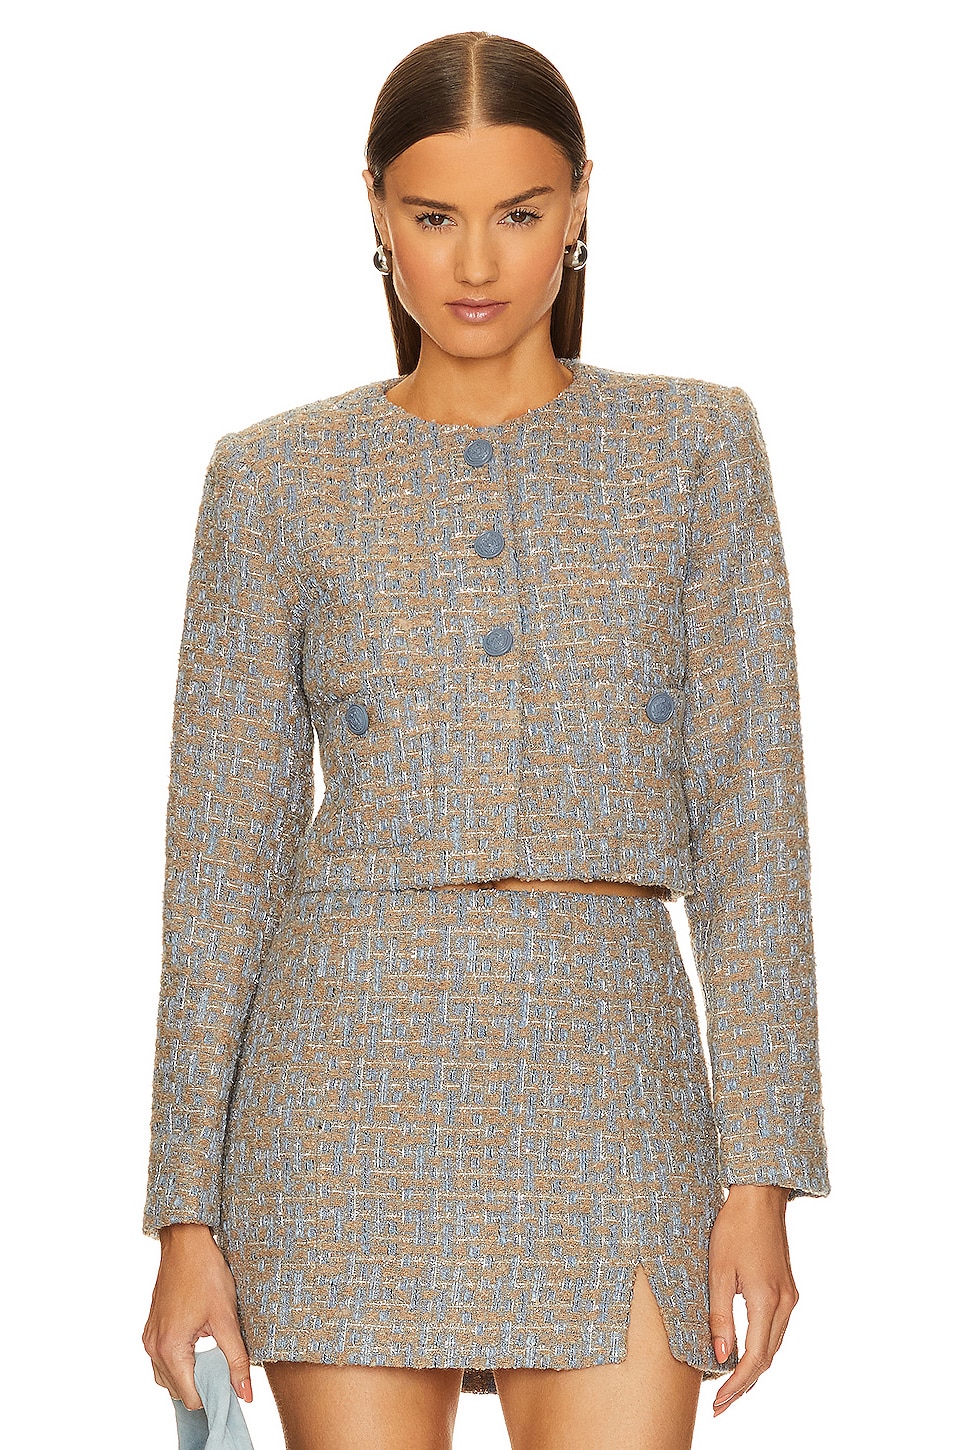 ASTR the Label Lyssa Jacket in Blue & Taupe Silver | REVOLVE